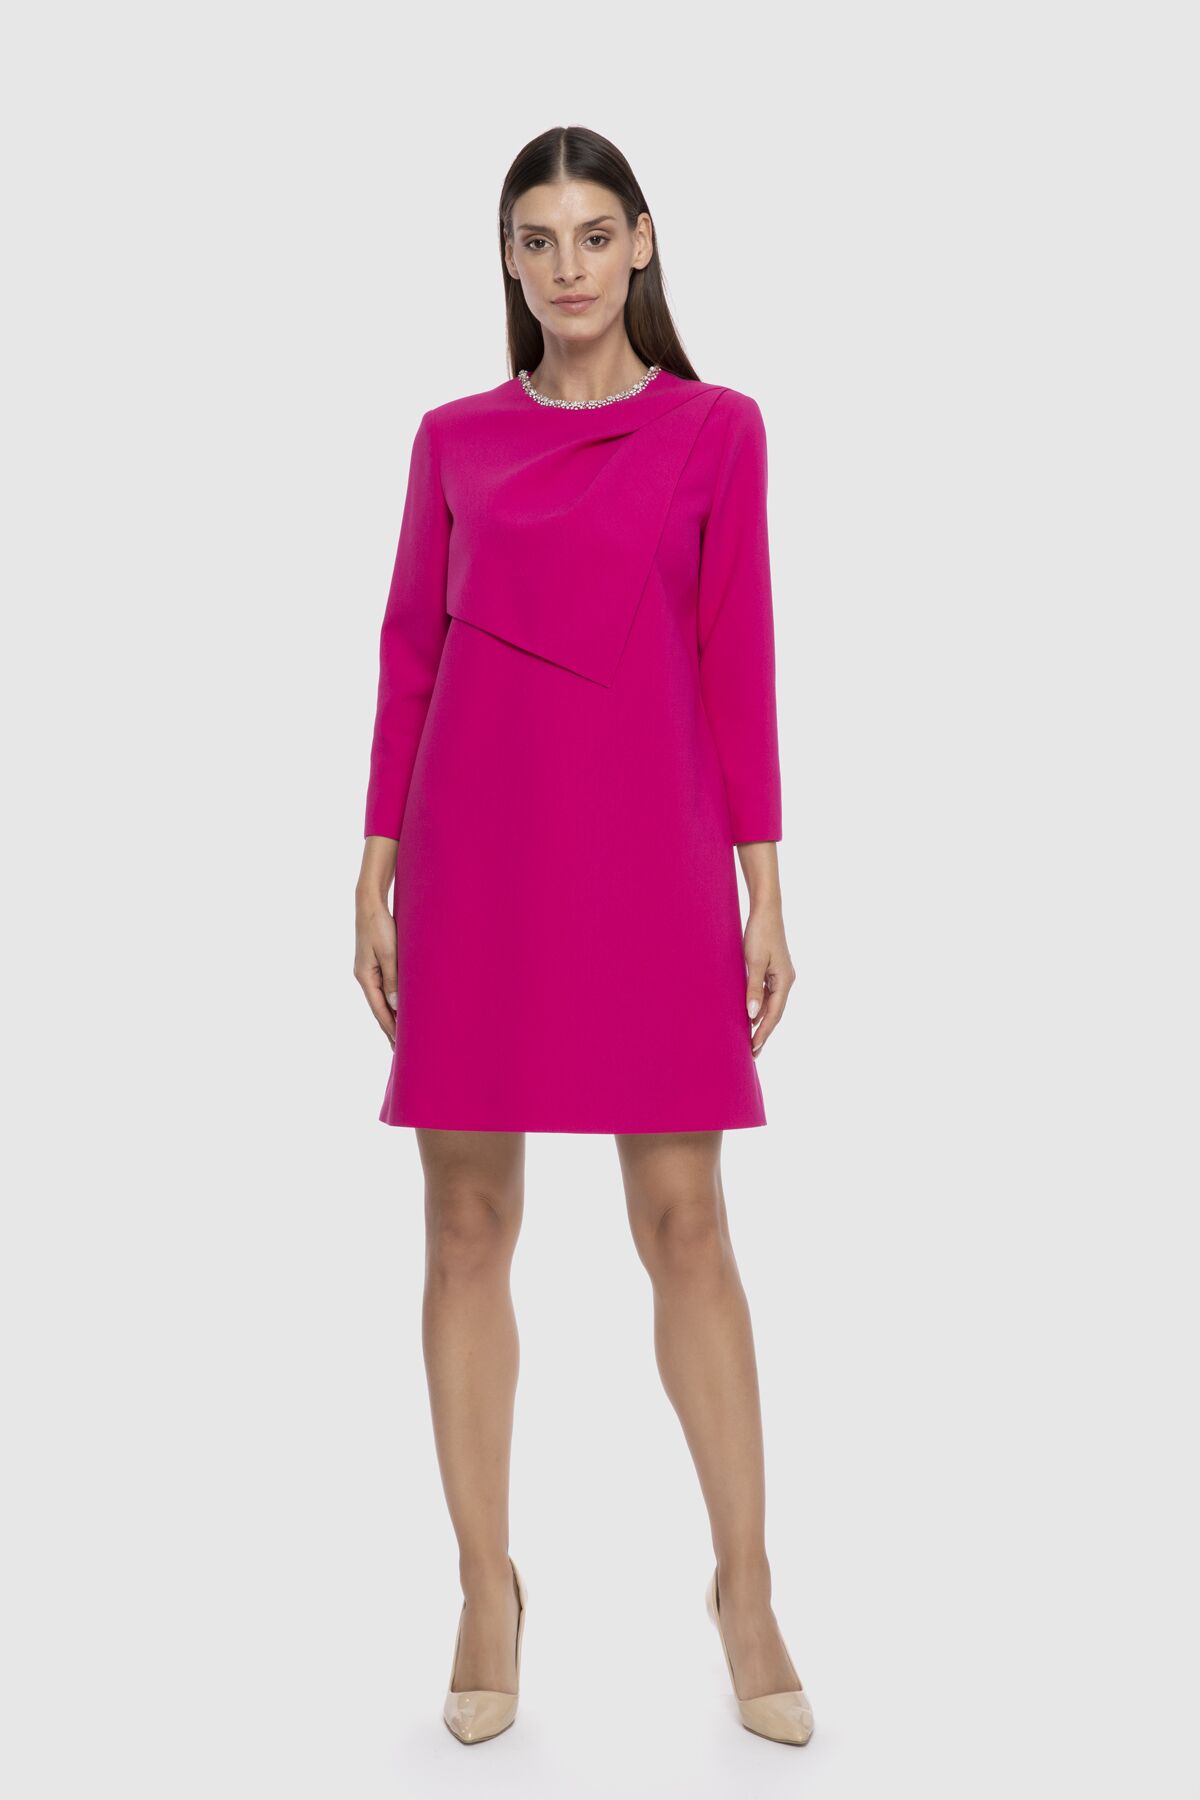  GIZIA - Embroidered Collar Front Pleat Piece Mini Pink Dress